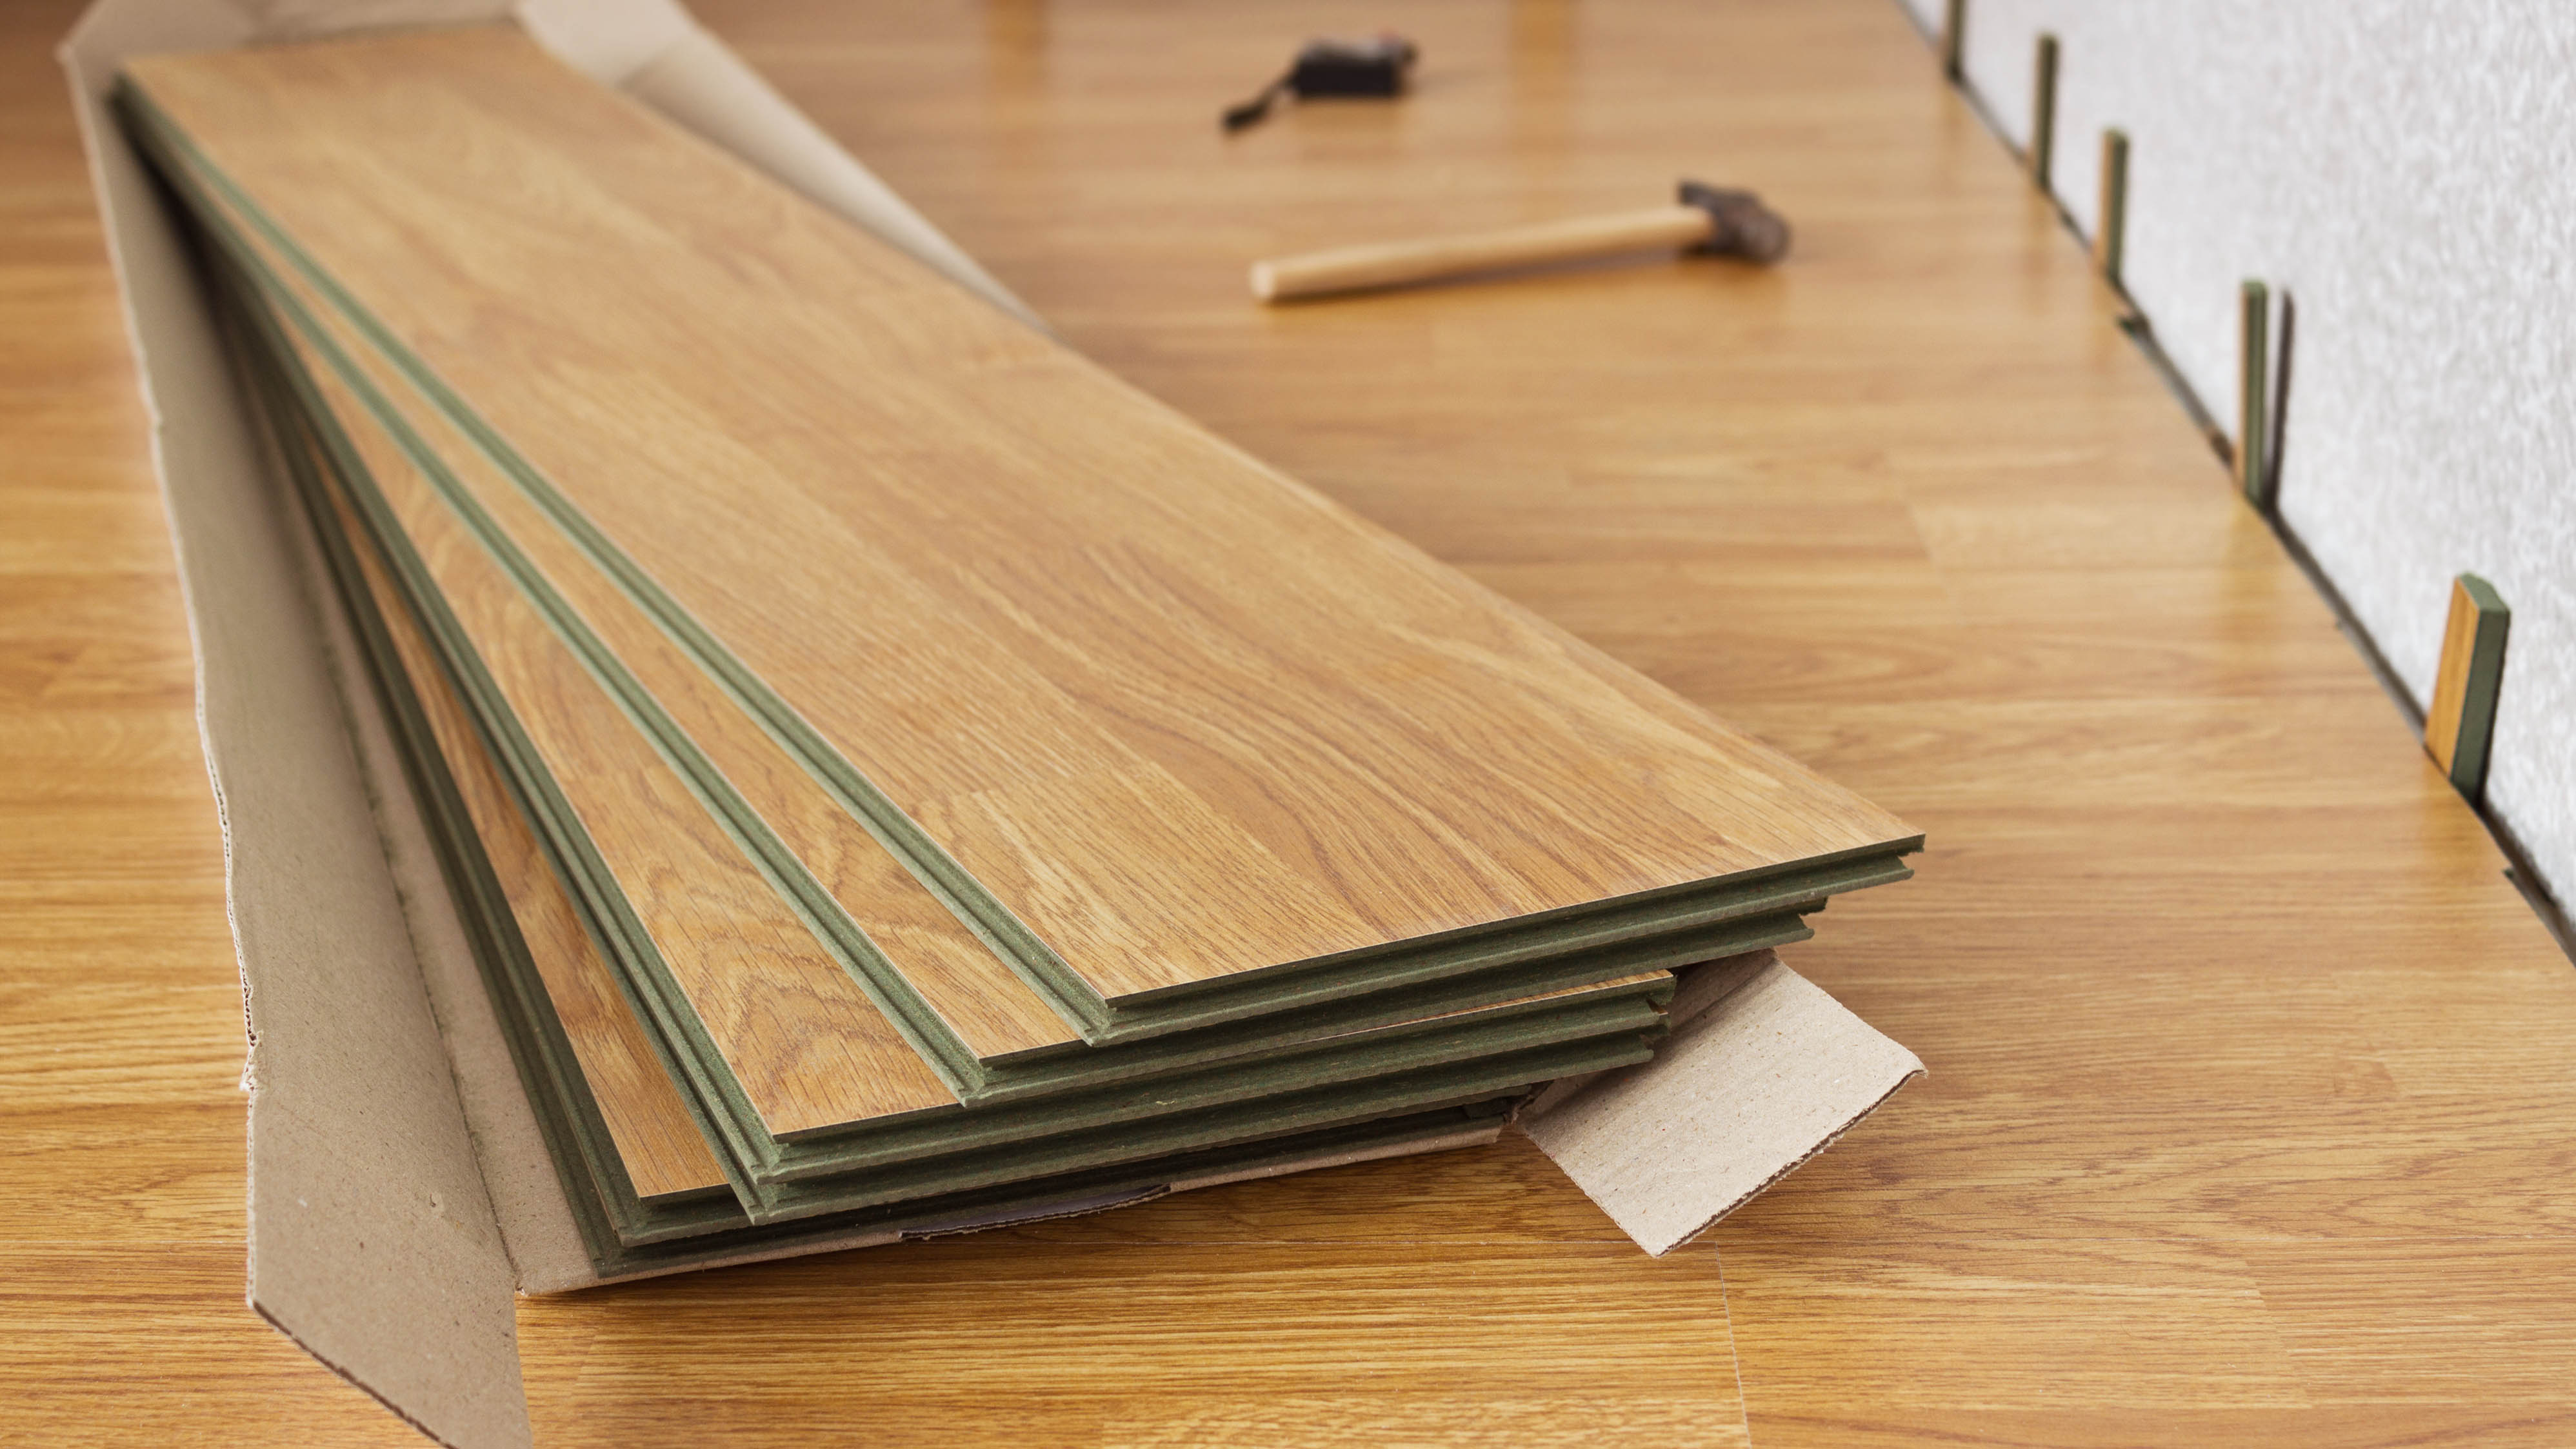 How to install laminate flooring without calling a builder | Tom's Guide